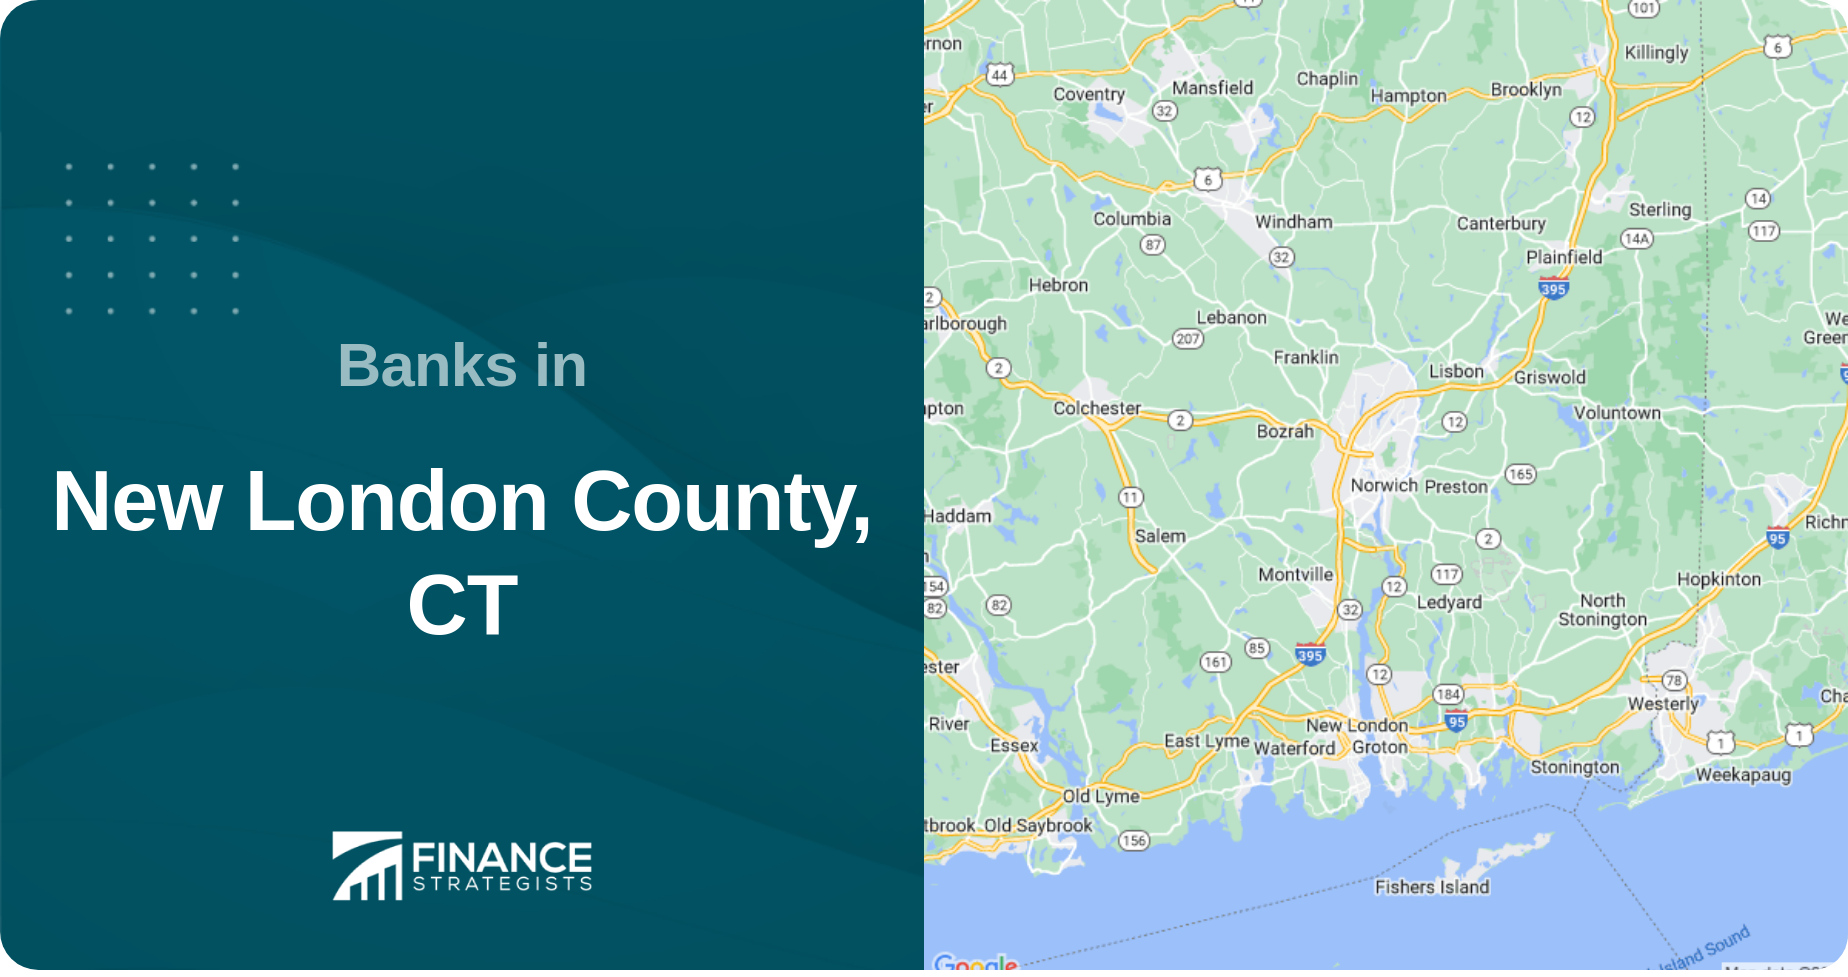 Banks in New London County, CT